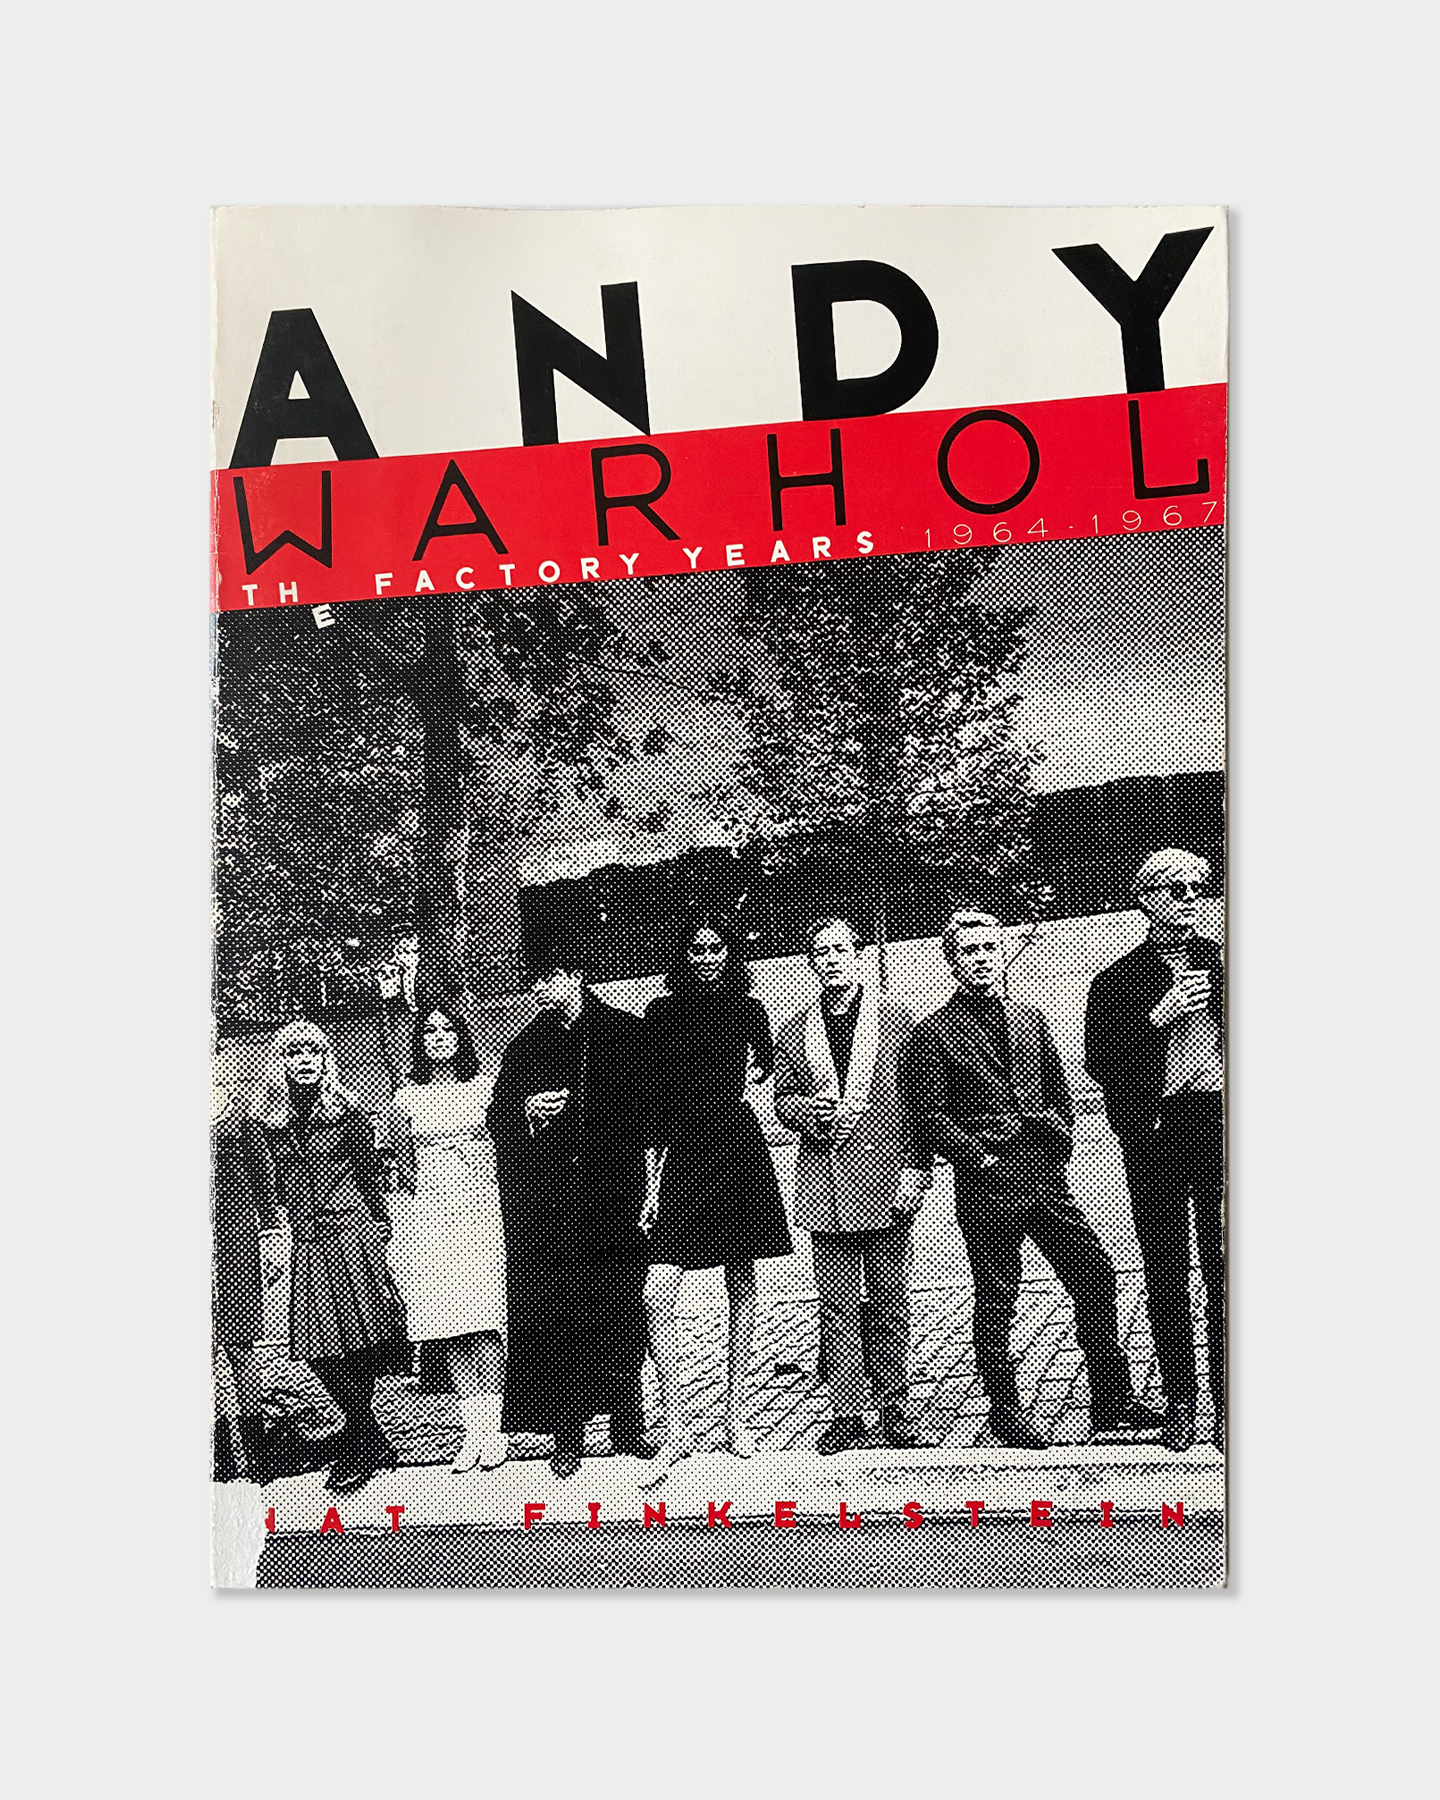 Andy Warhol, The Factory Years 1964-1967 (1989)